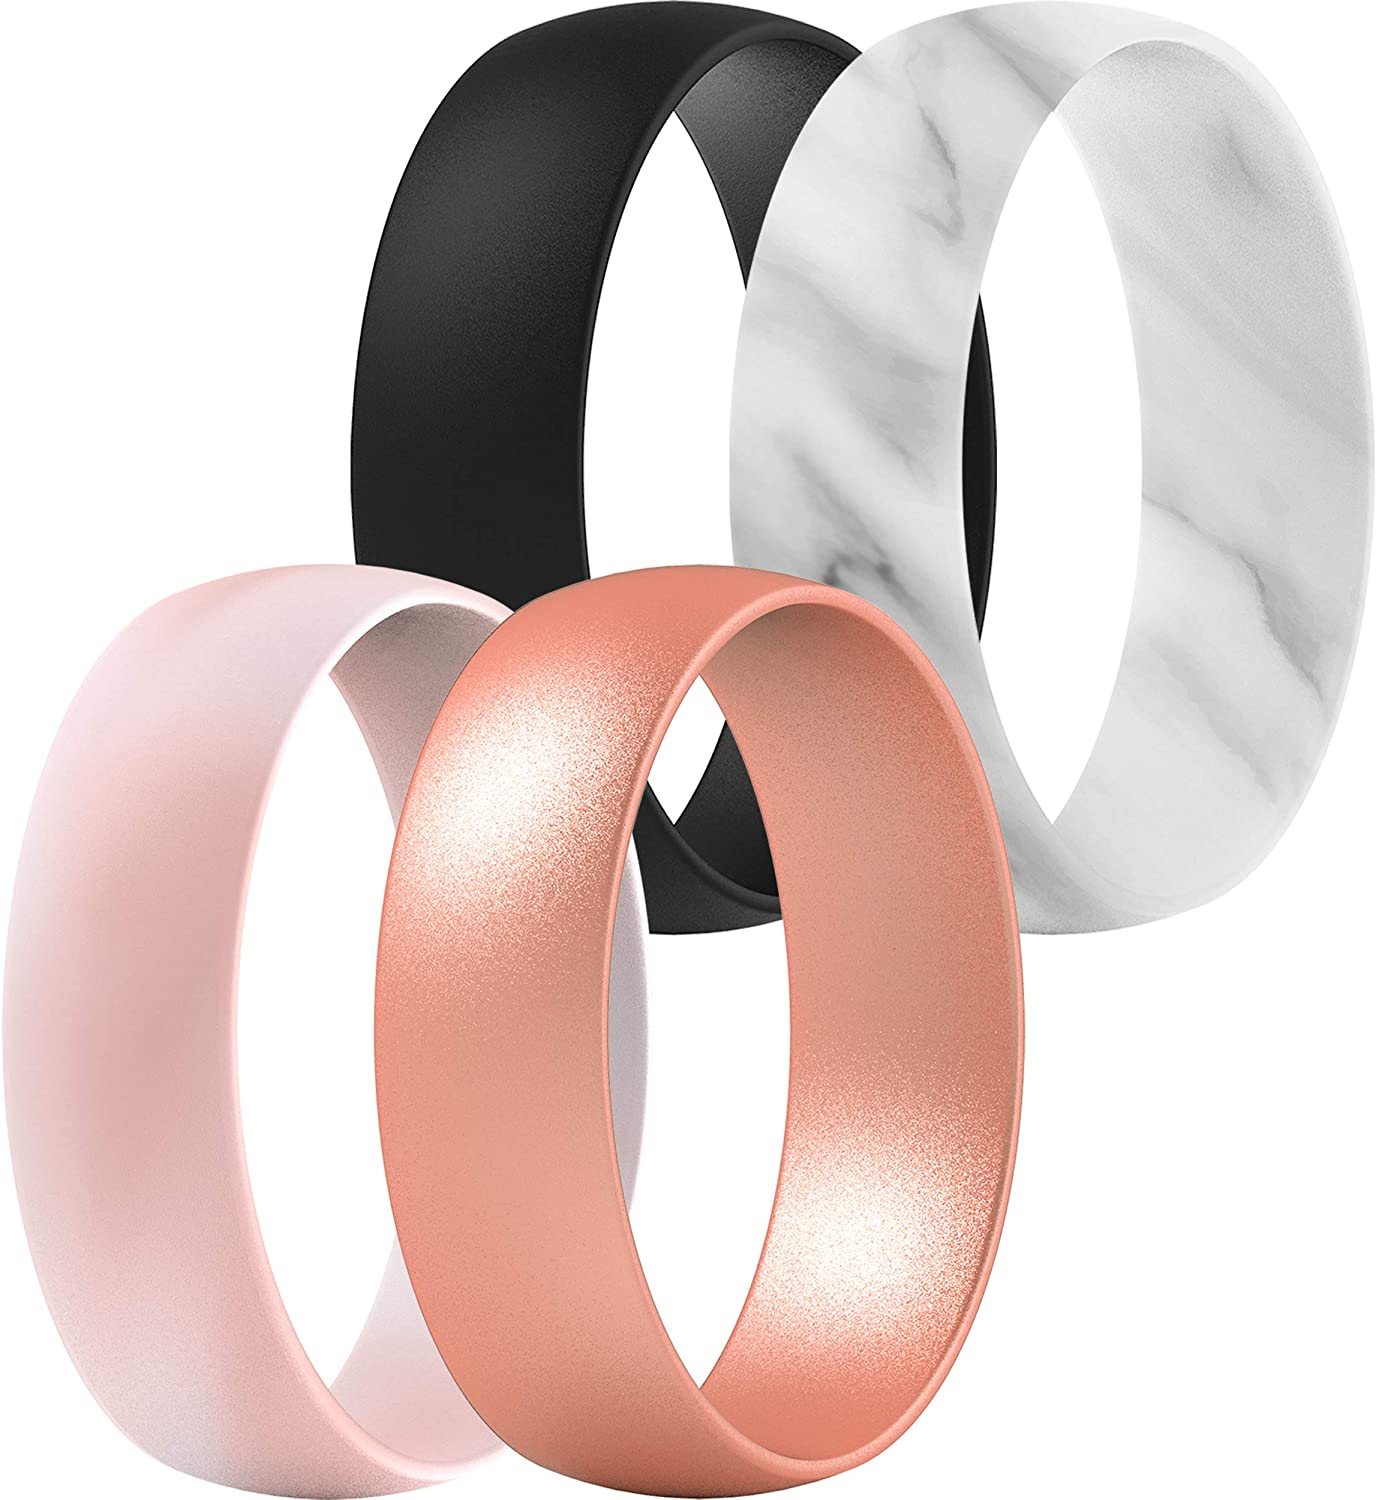 ThunderFit Hypoallergenic Flexible Silicone Rings, 4-Pack